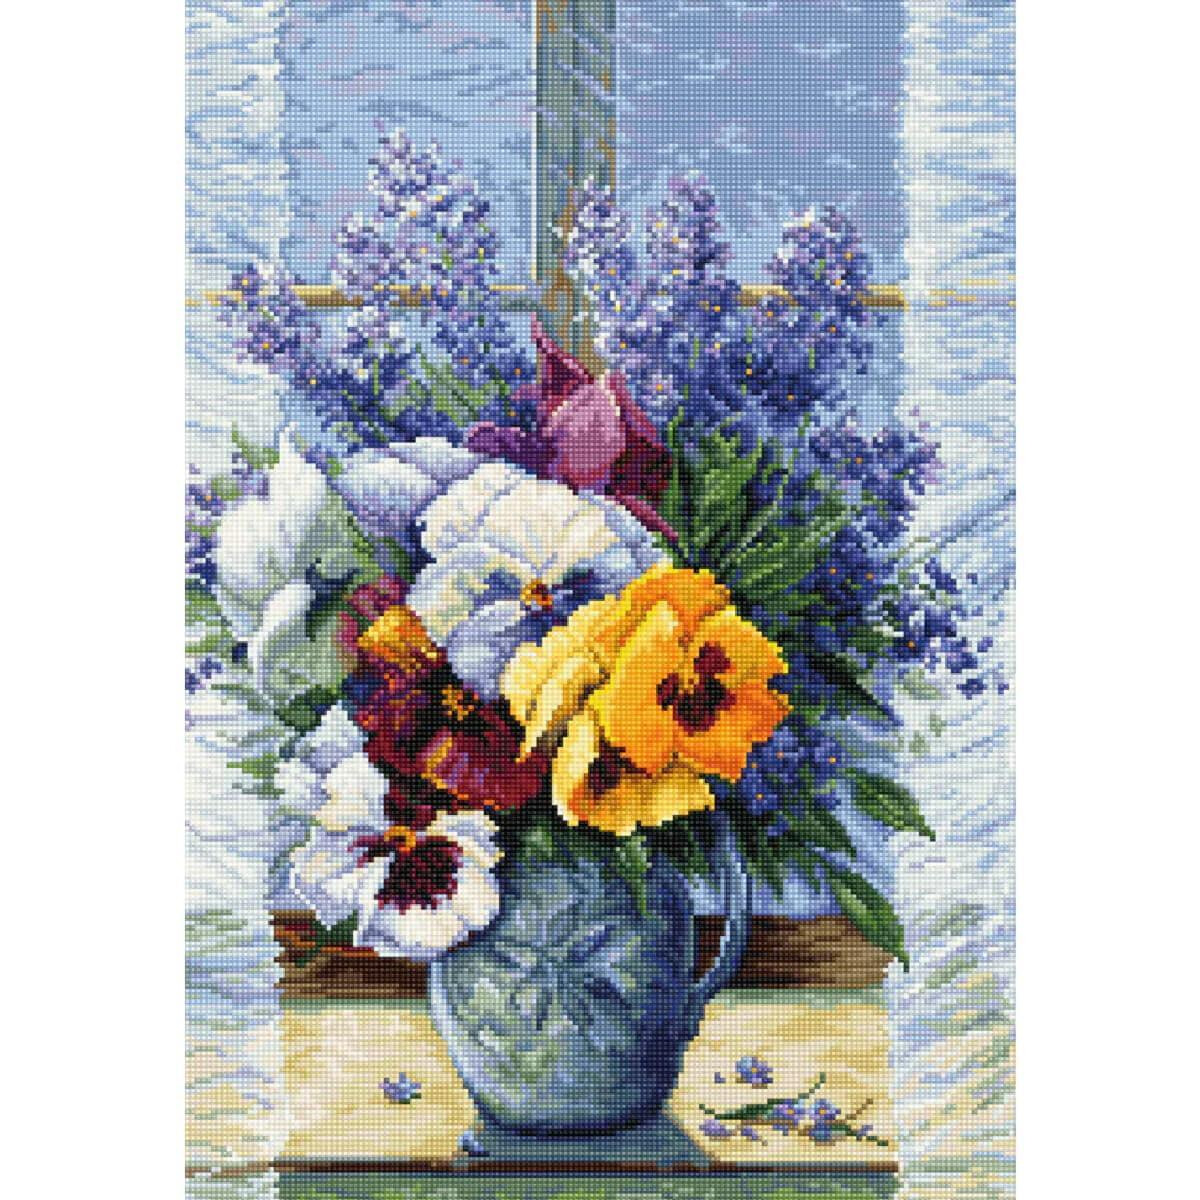 A digital cross stitch design features a vase full of...